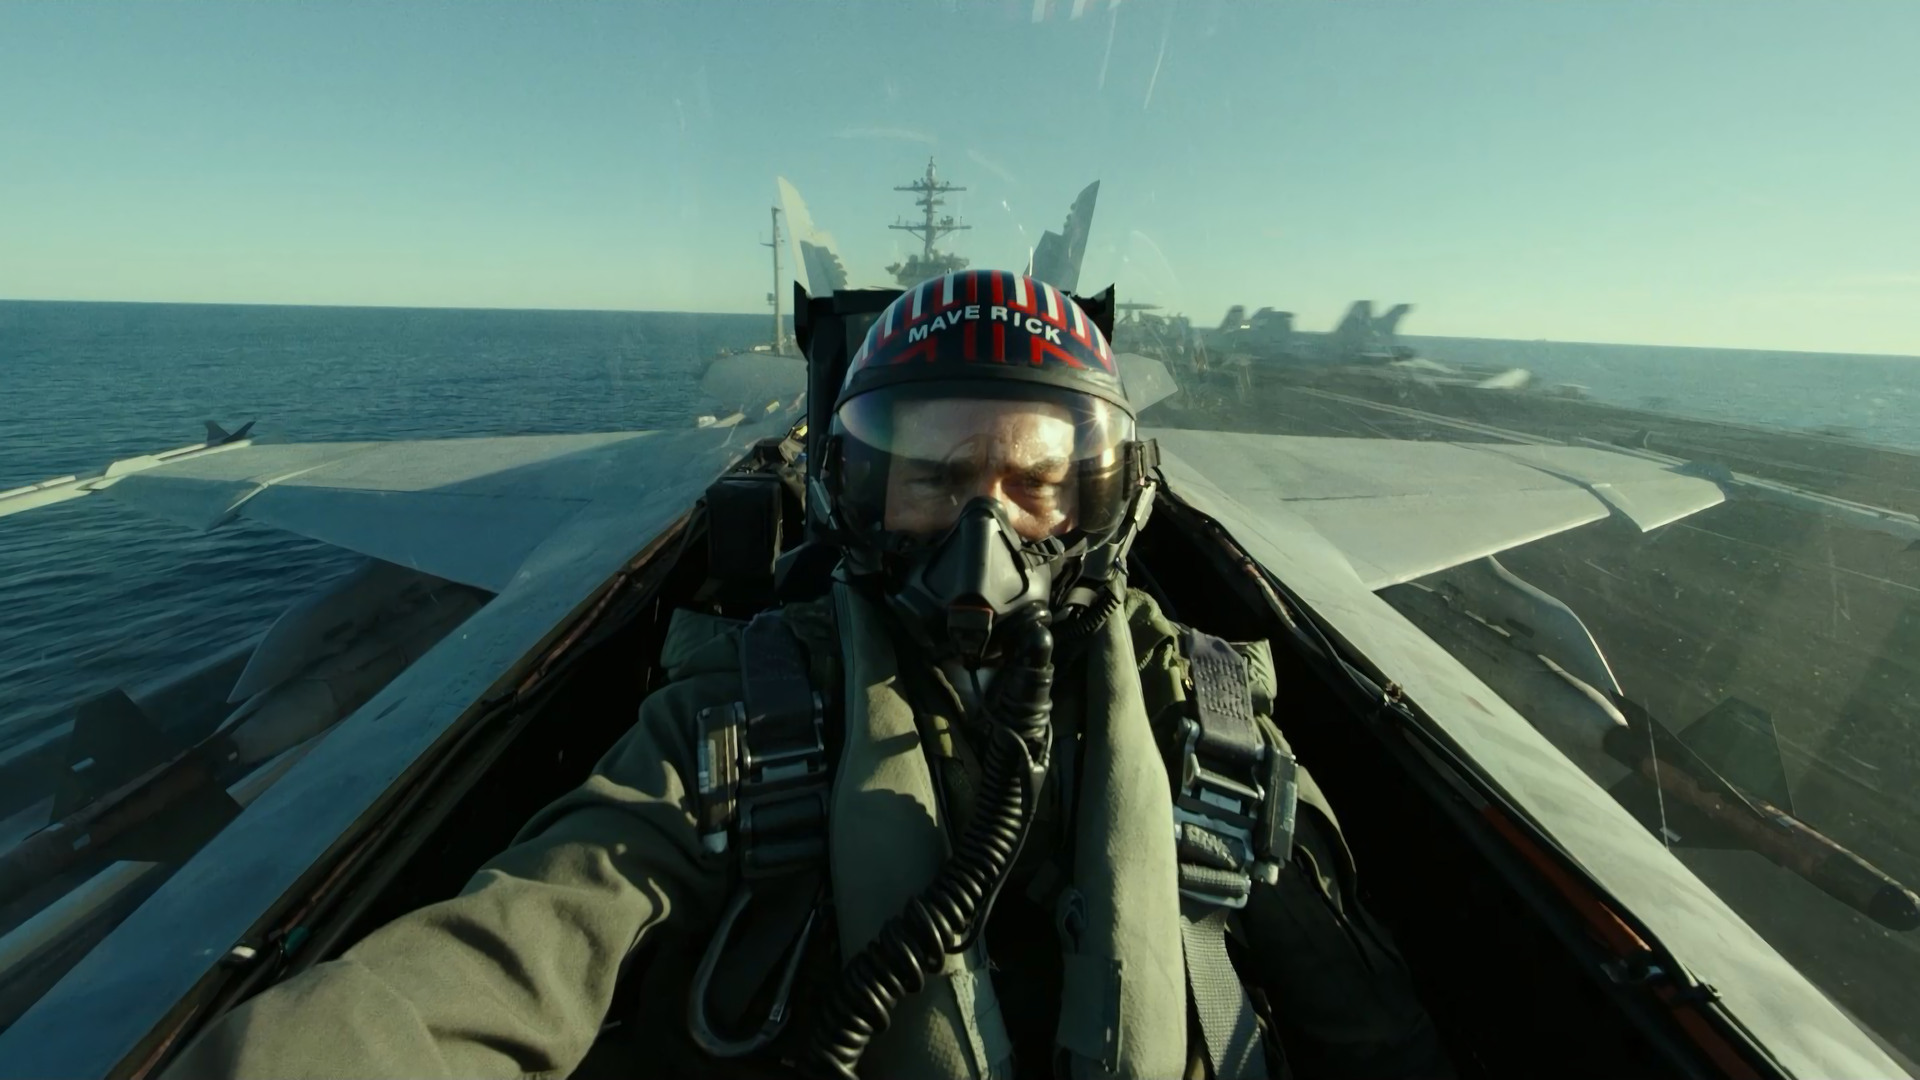 Actor Tom Cruise sits in a fighter jet as the pilot, wearing a blue and red helmet